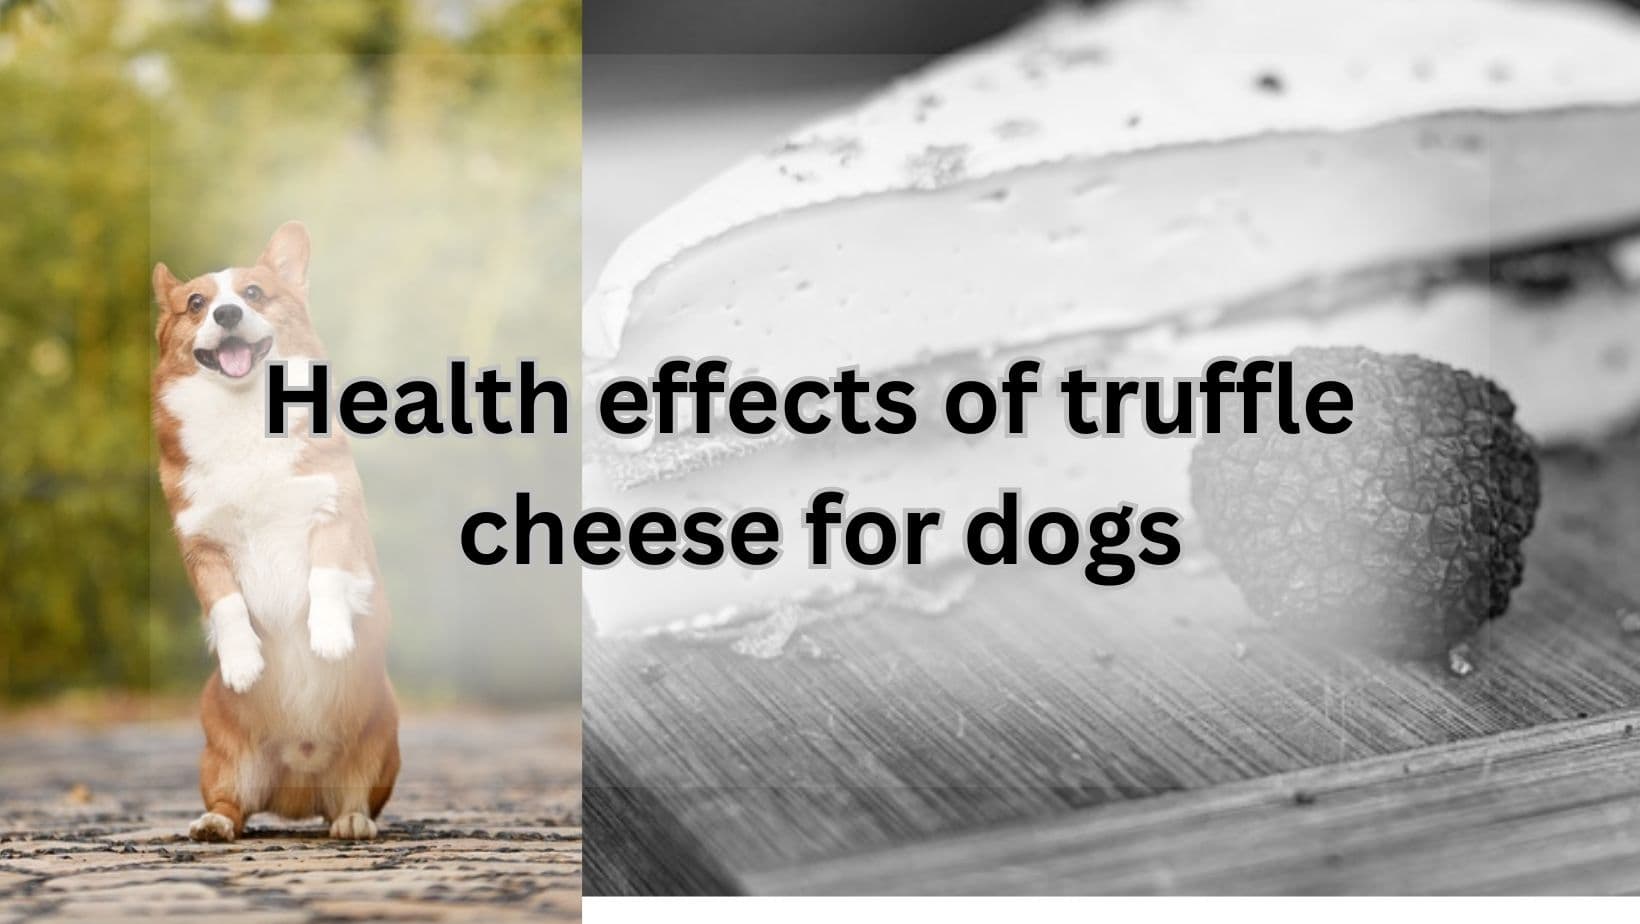 Truffle cheese for dogs